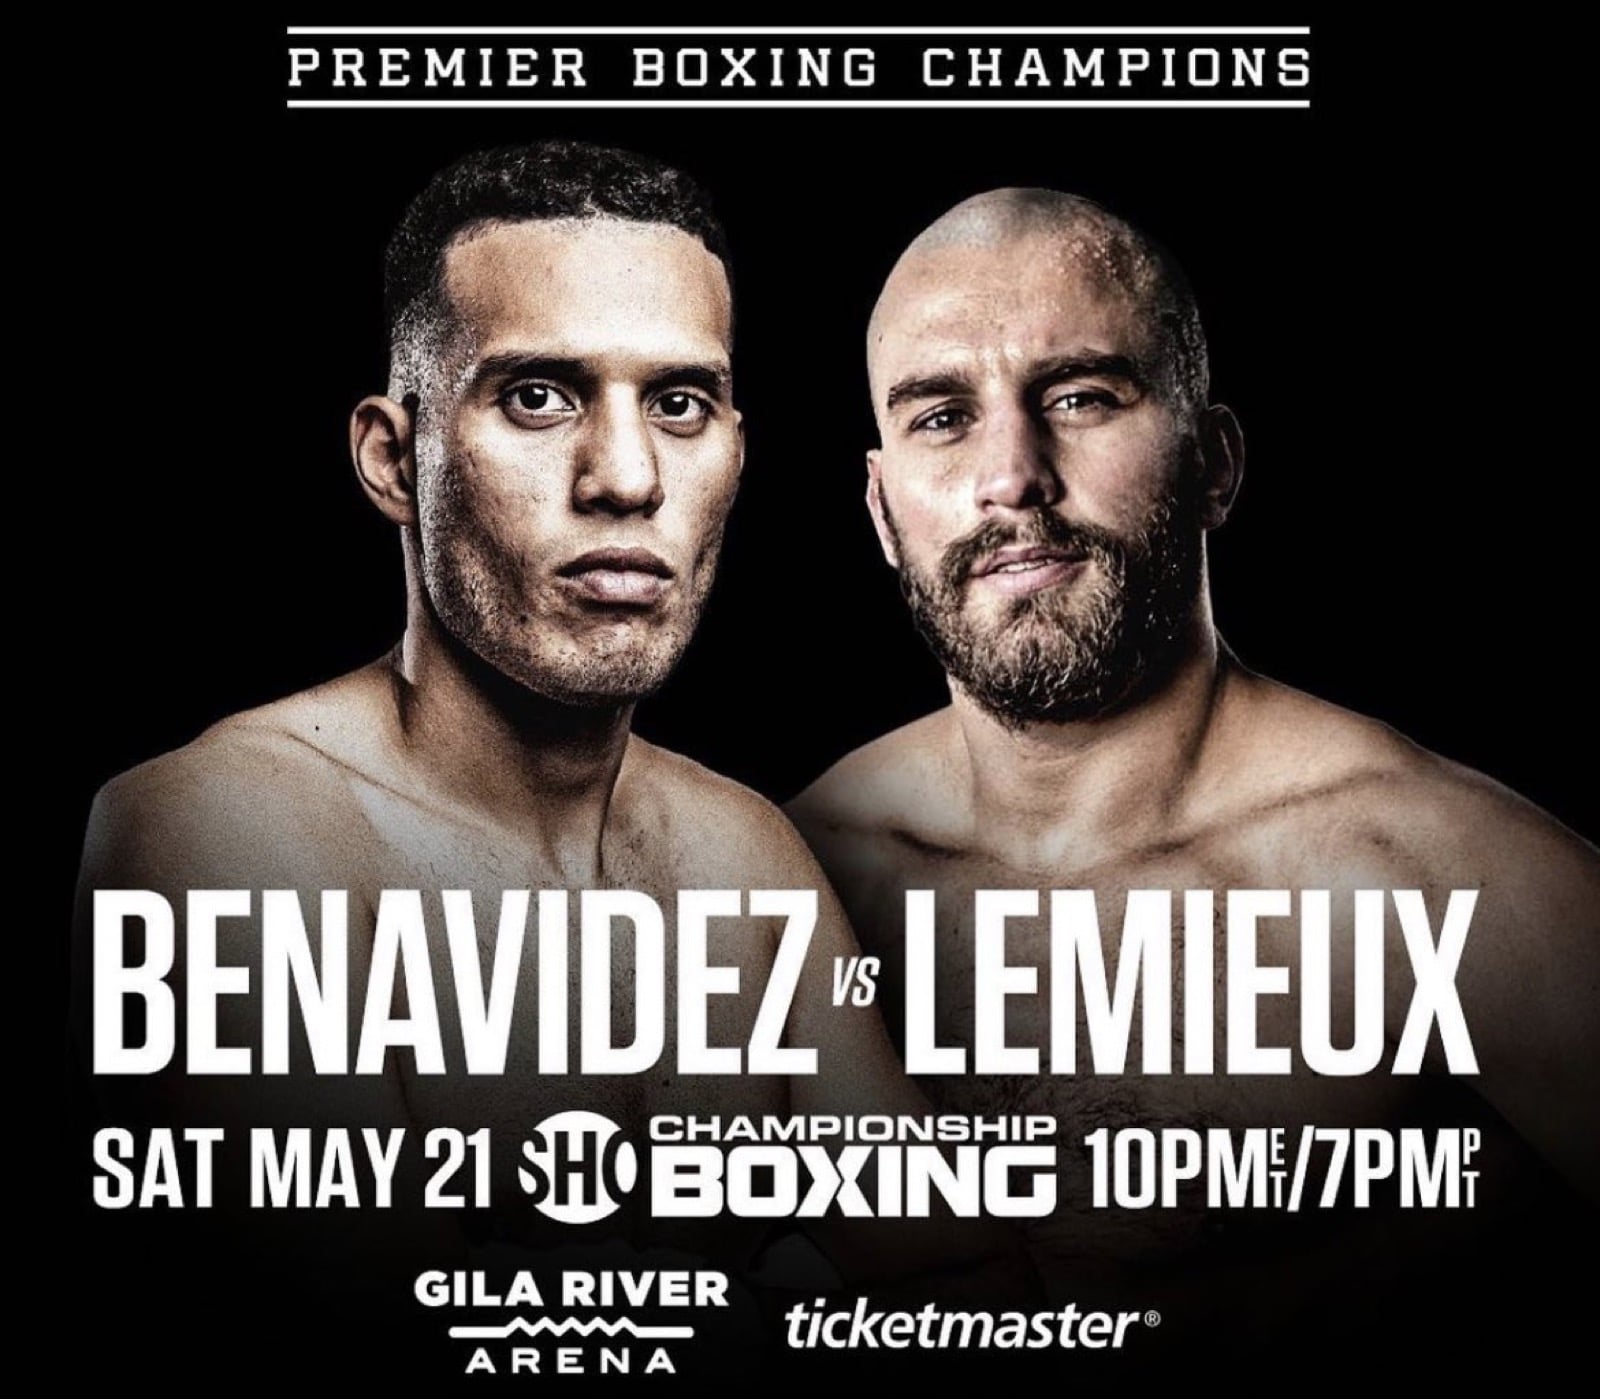 Quotes: David Benavidez vs. David Lemieux - press conference for Showtime fight on May 21st